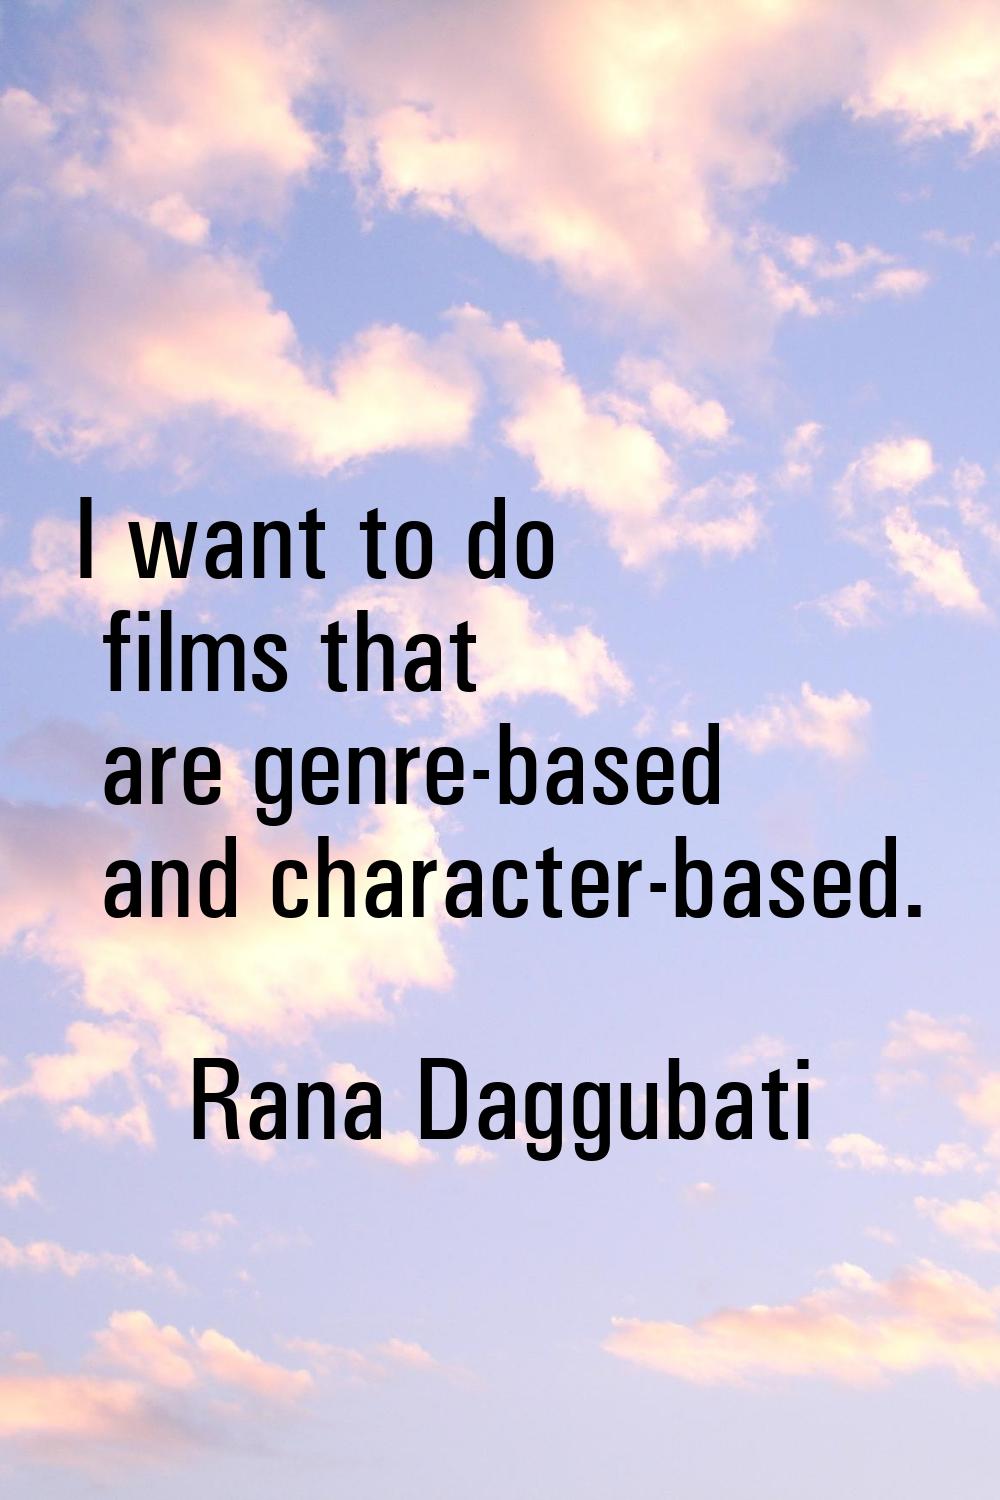 I want to do films that are genre-based and character-based.